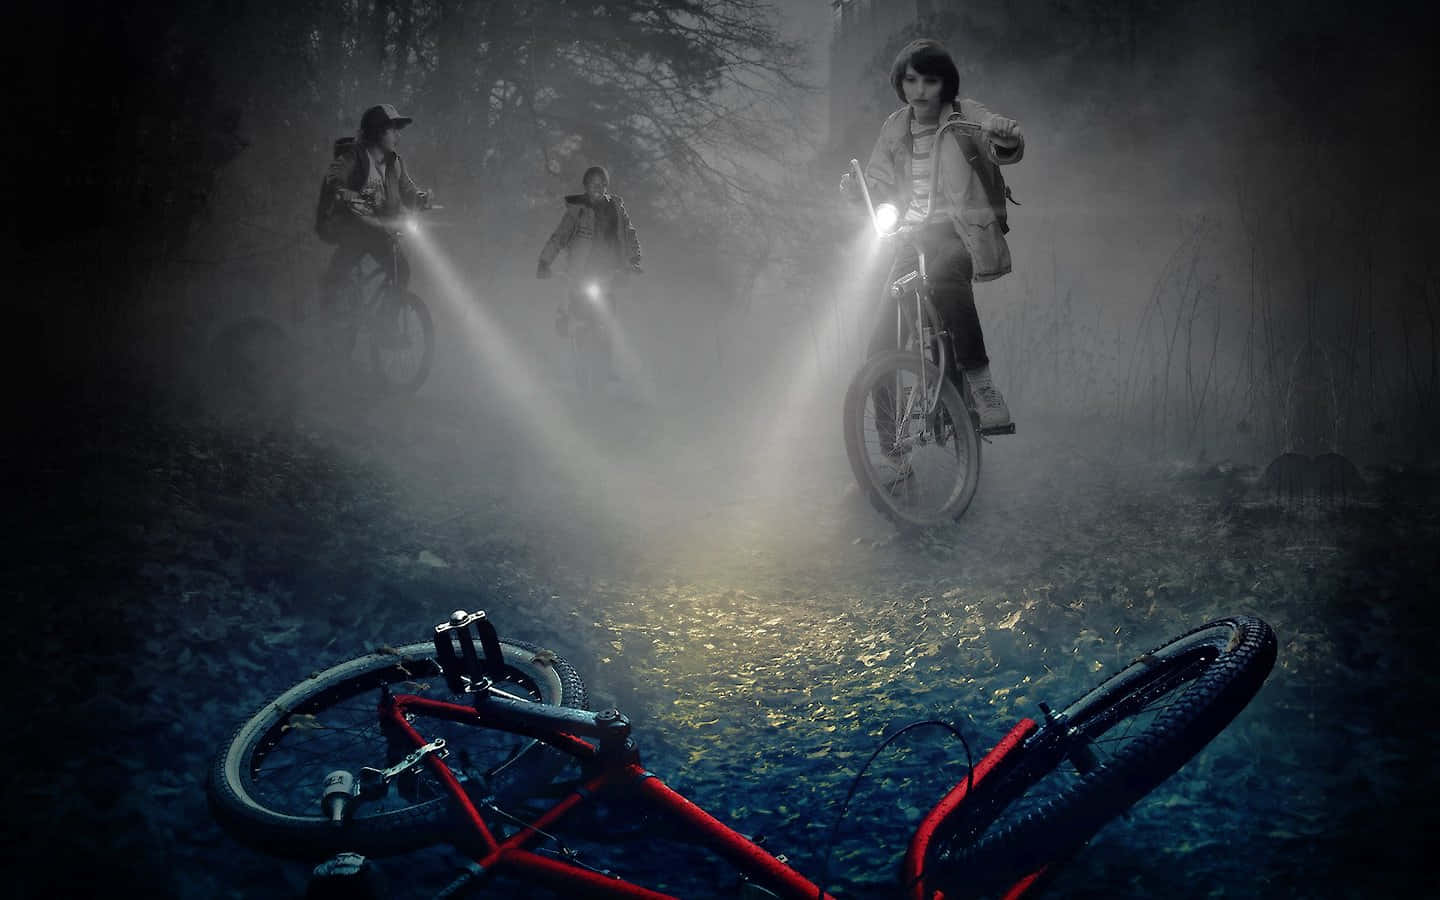 Blast off into the Upside Down with this retro-inspired Stranger Things bike. Wallpaper